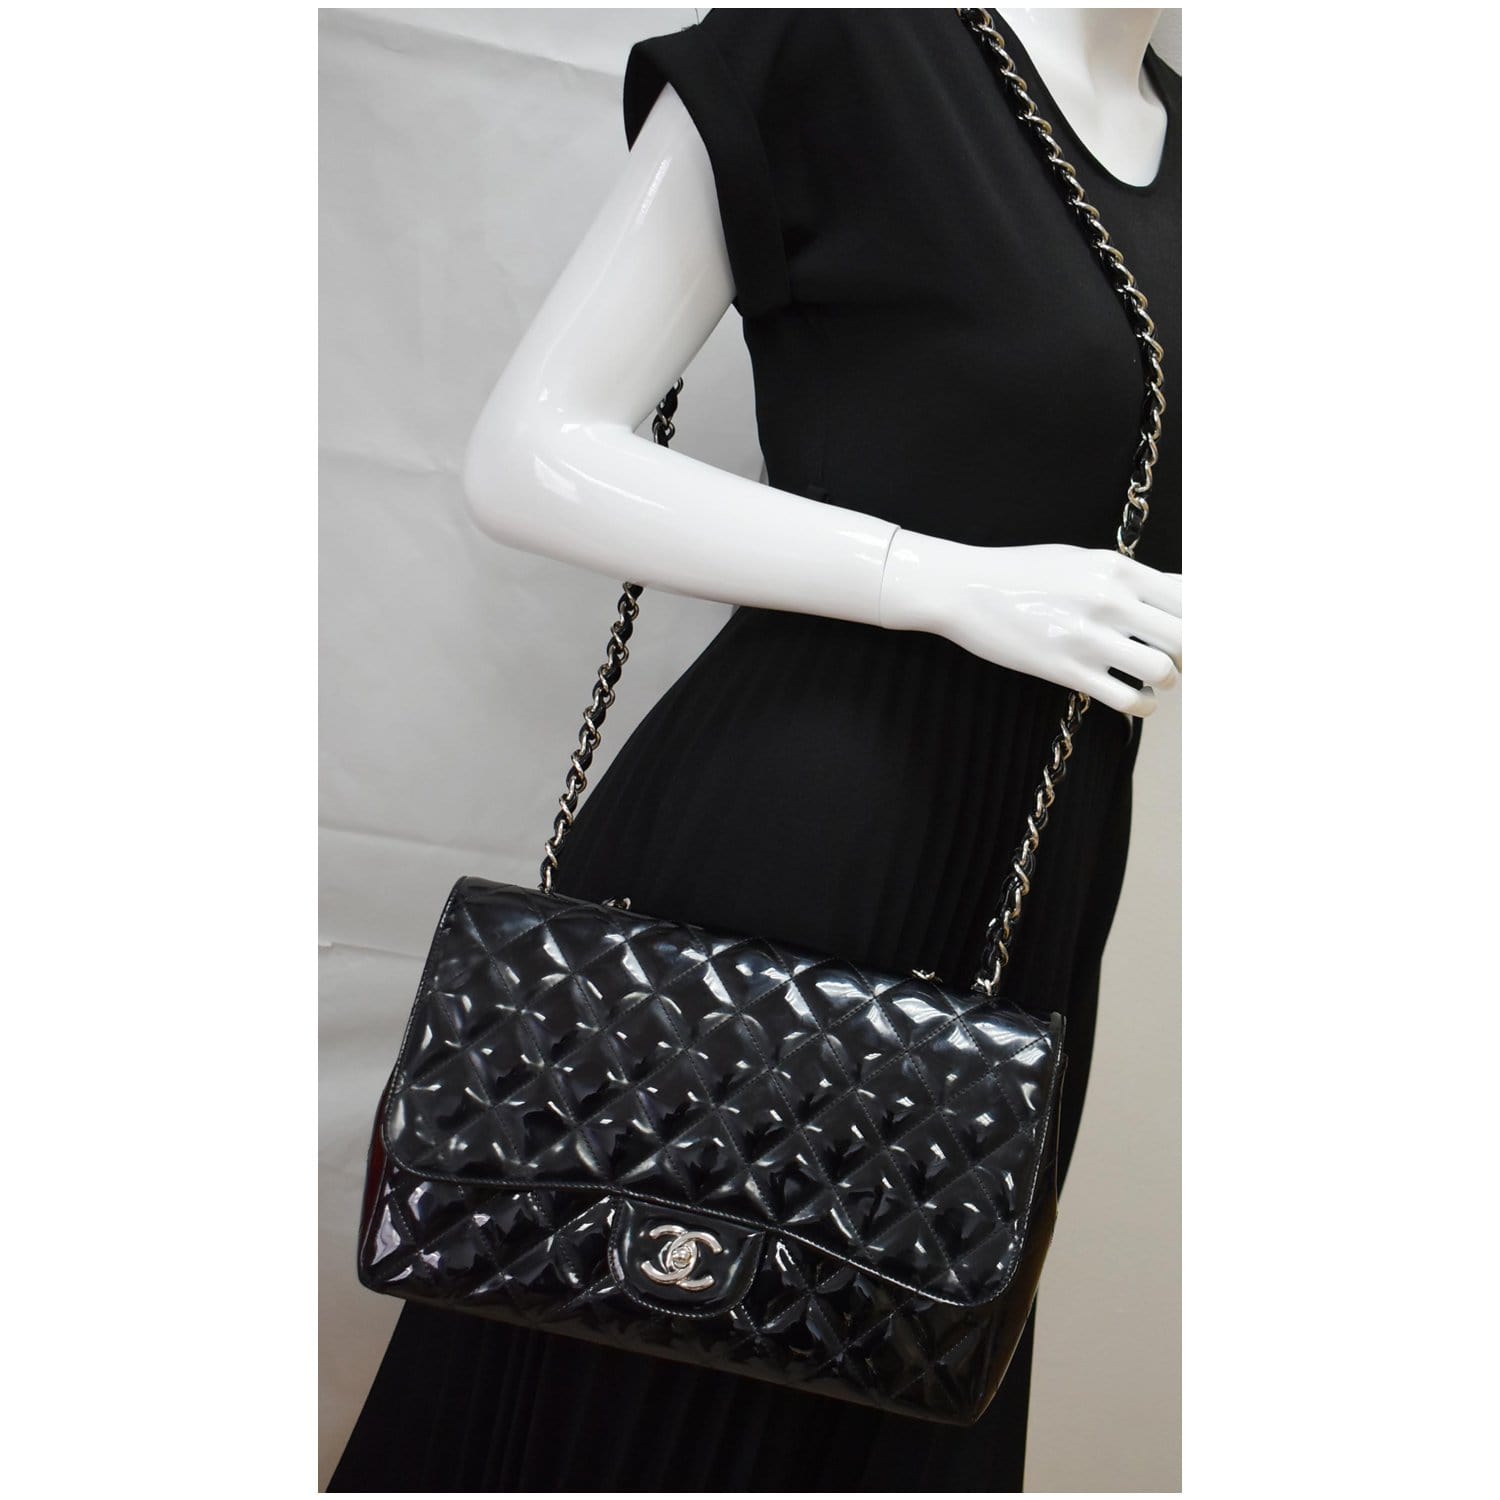 Chanel Classic Double Jumbo Quilted Flap 223006 Black Patent Leather  Shoulder Bag  Chanel  Buy at TrueFacet